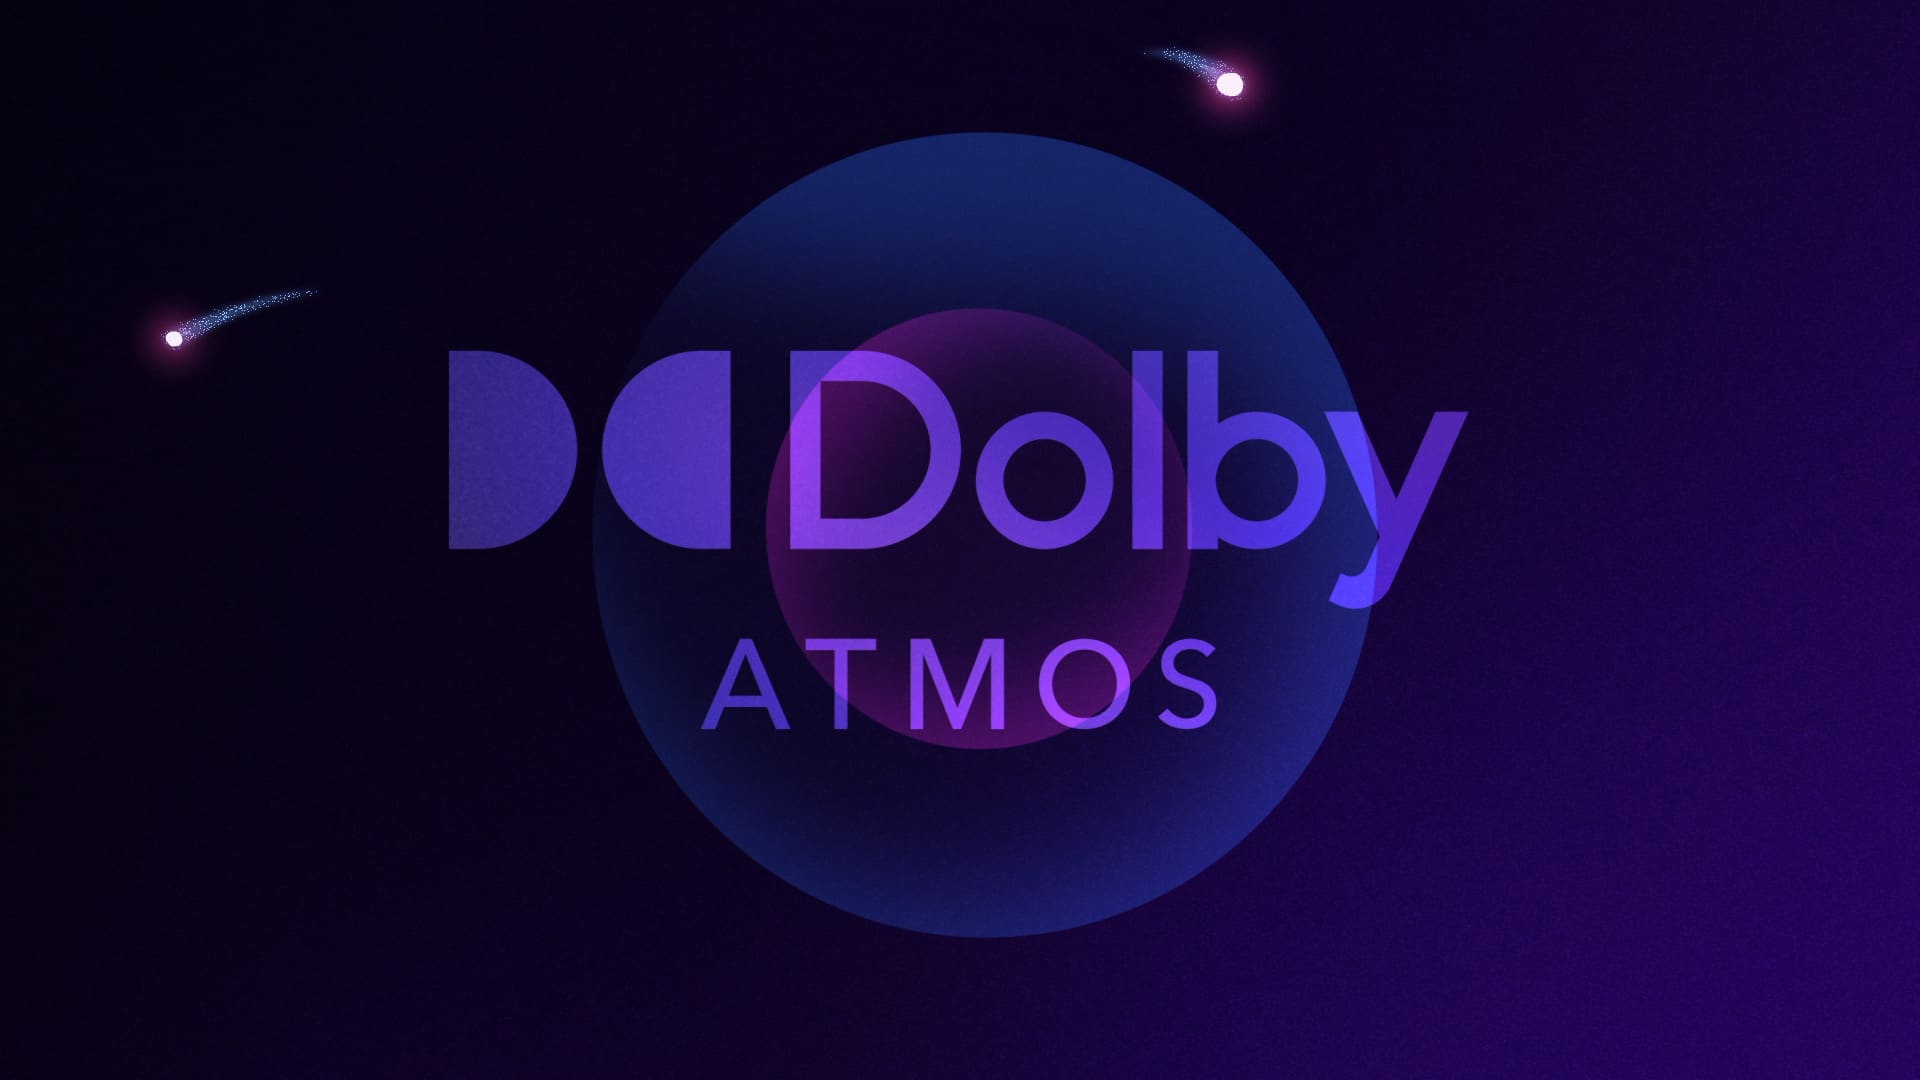 What's Dolby Atmos? - Coolblue - anything for a smile